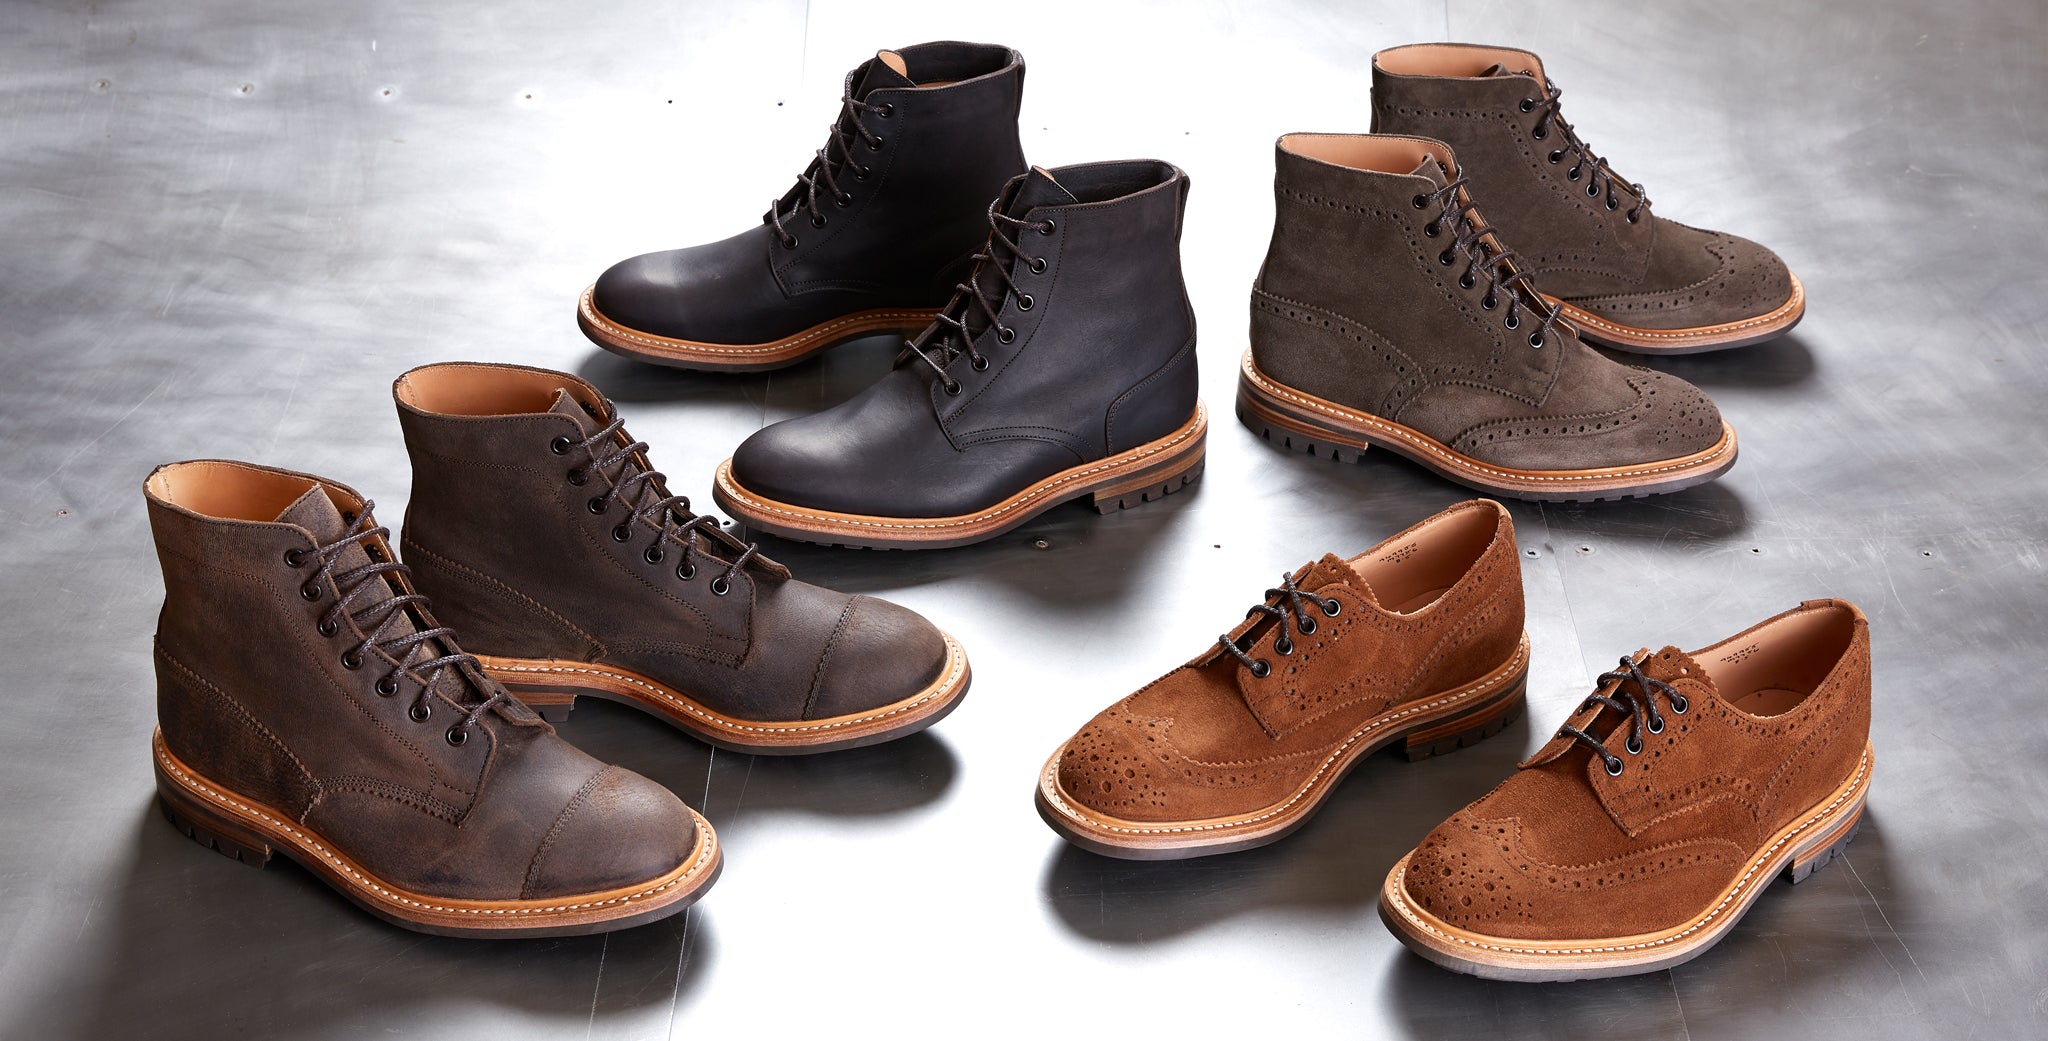 Division Road Foundational Footwear Release